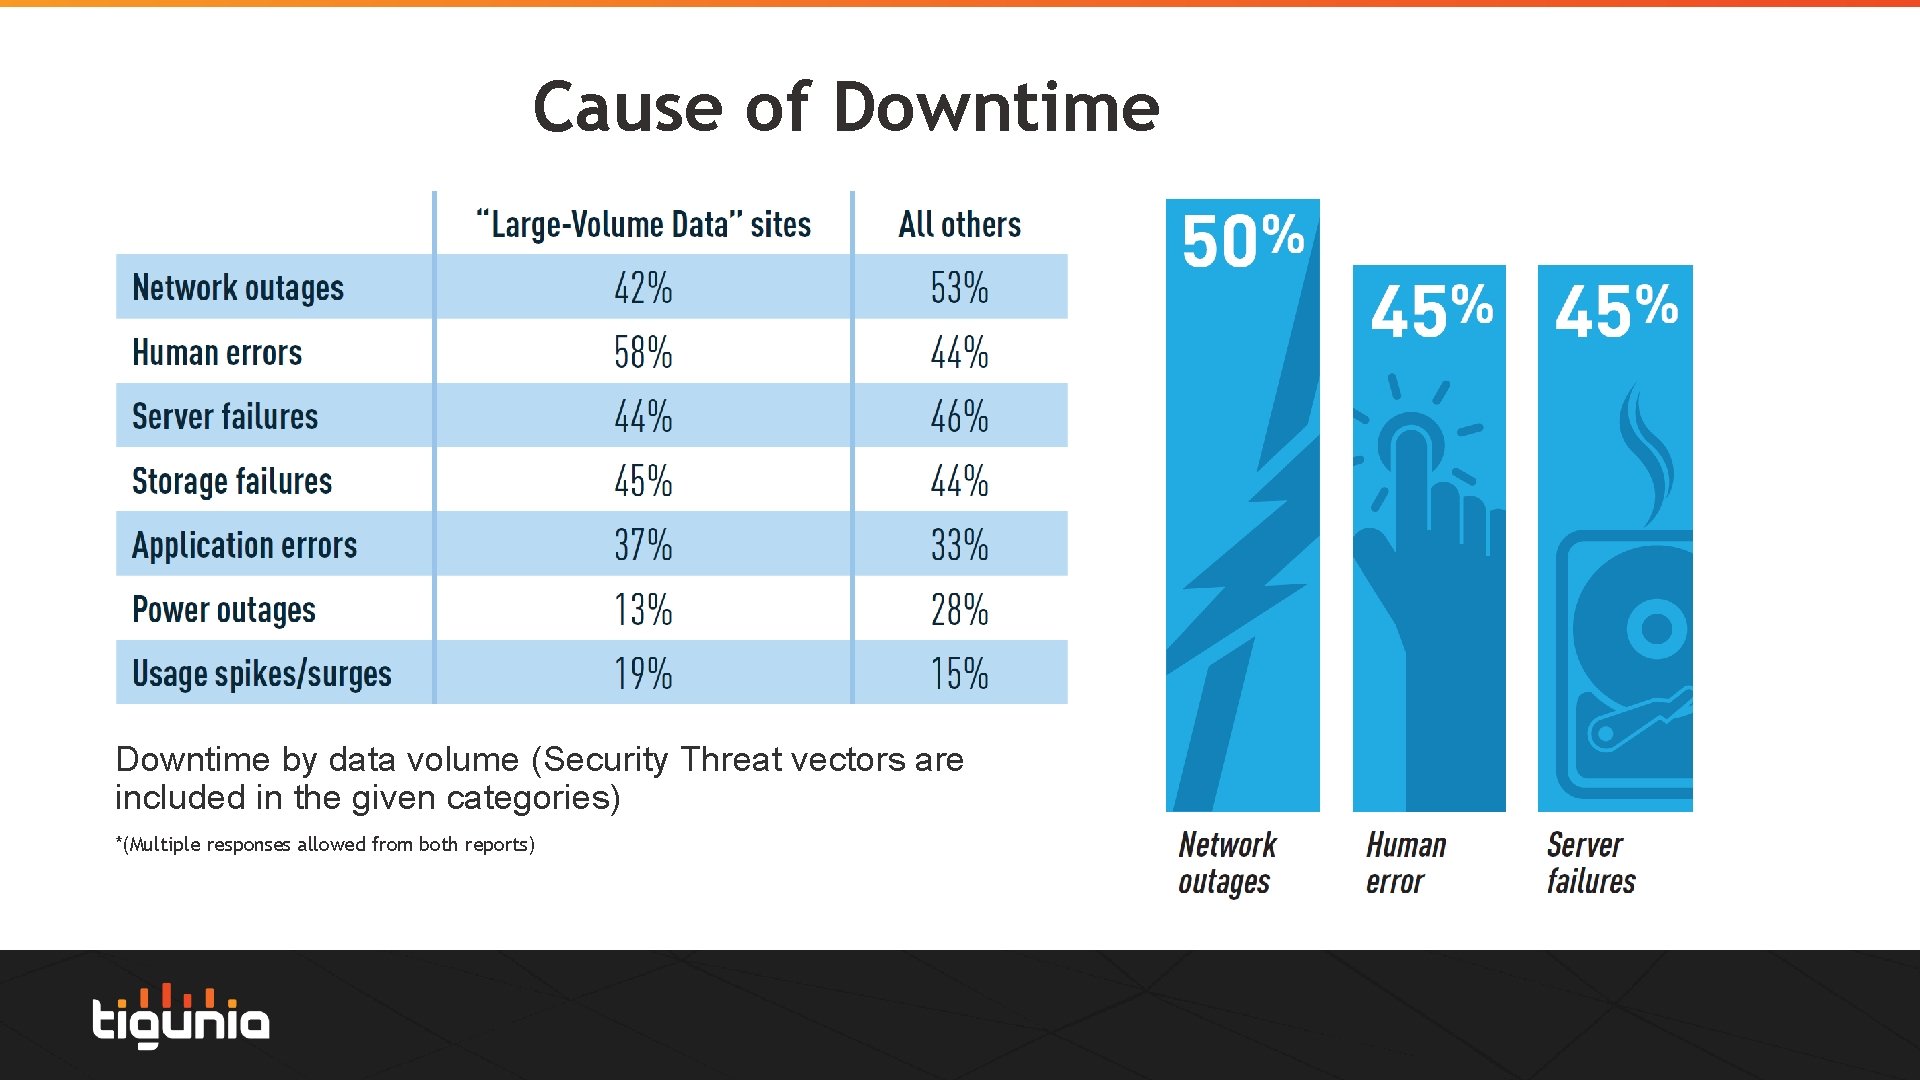 Cause of Downtime by data volume (Security Threat vectors are included in the given